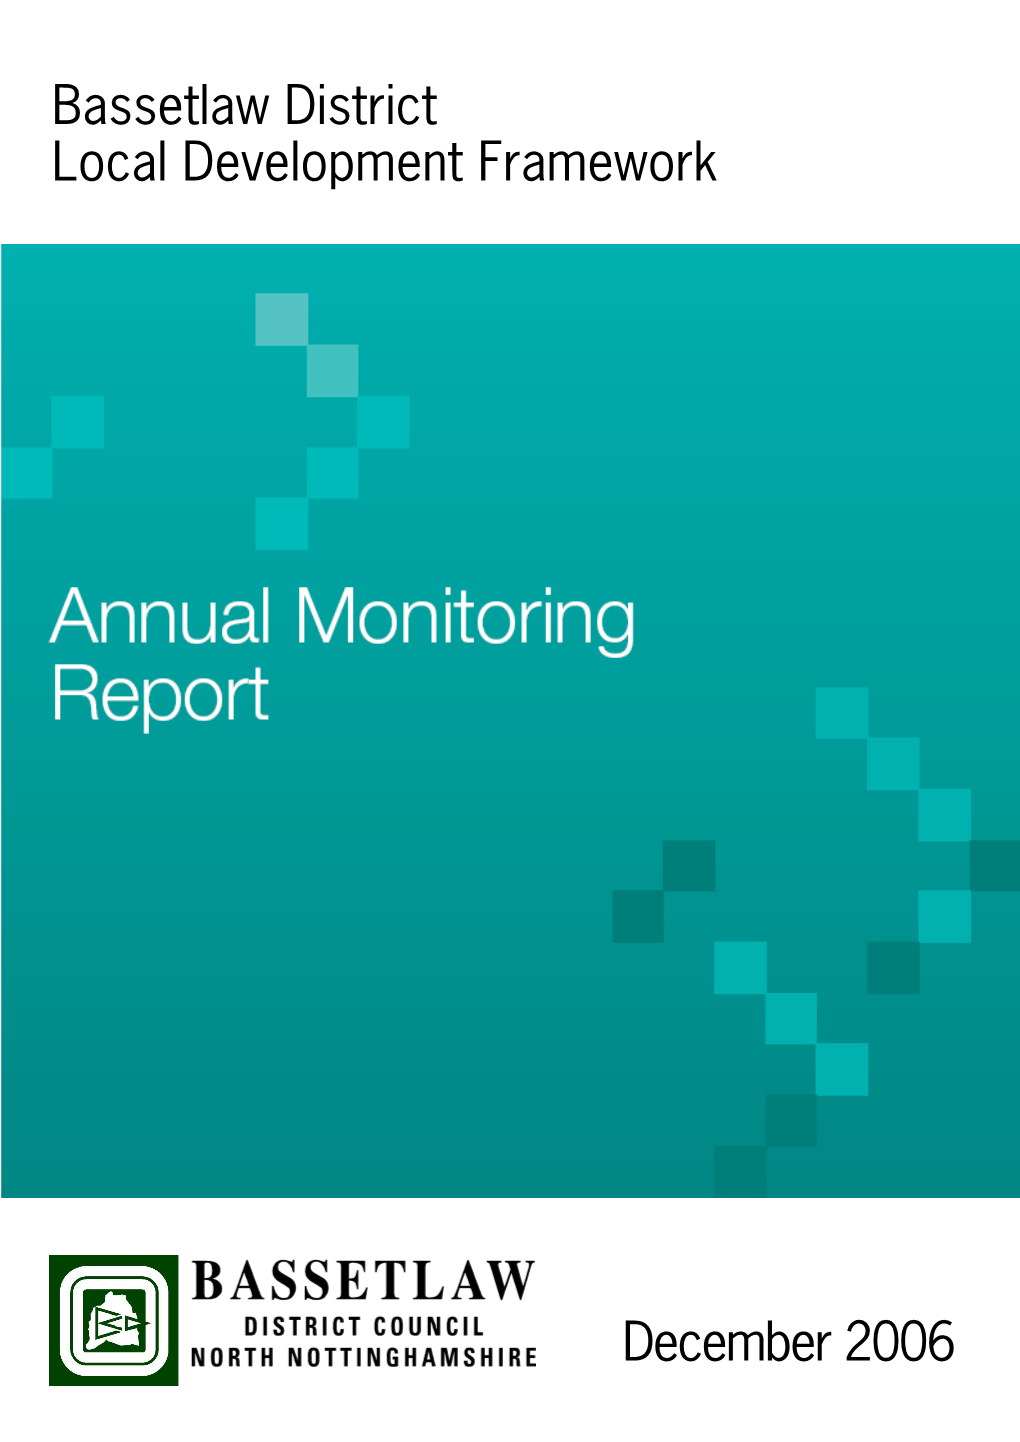 Annual Monitoring Report 5/6